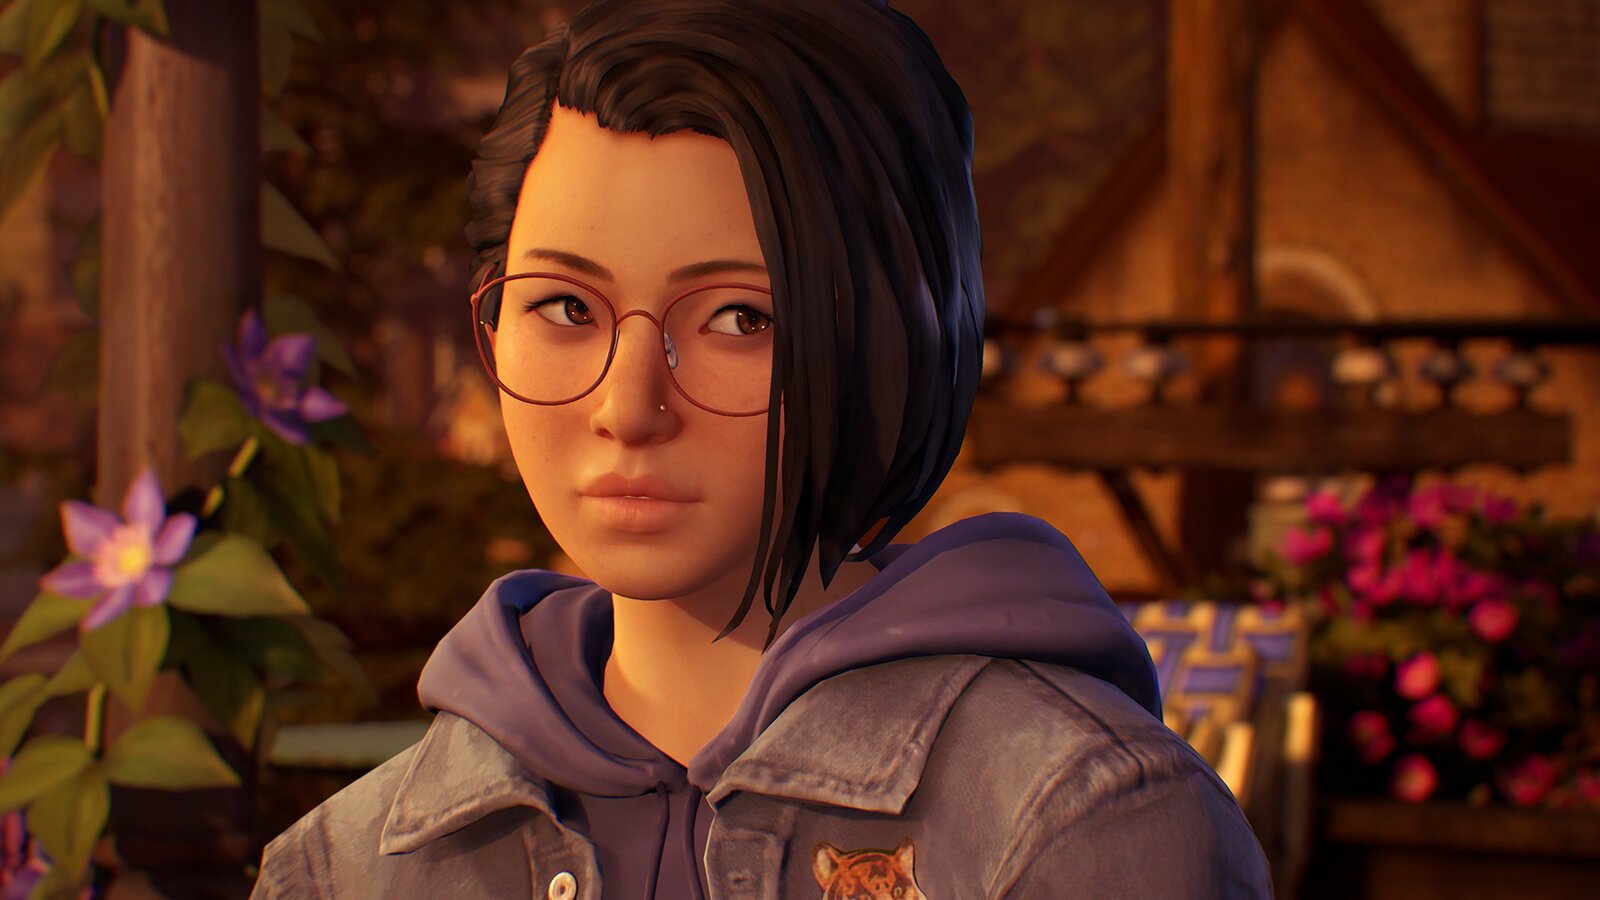 Life is Strange: True Colors - Alex Outfit Pack